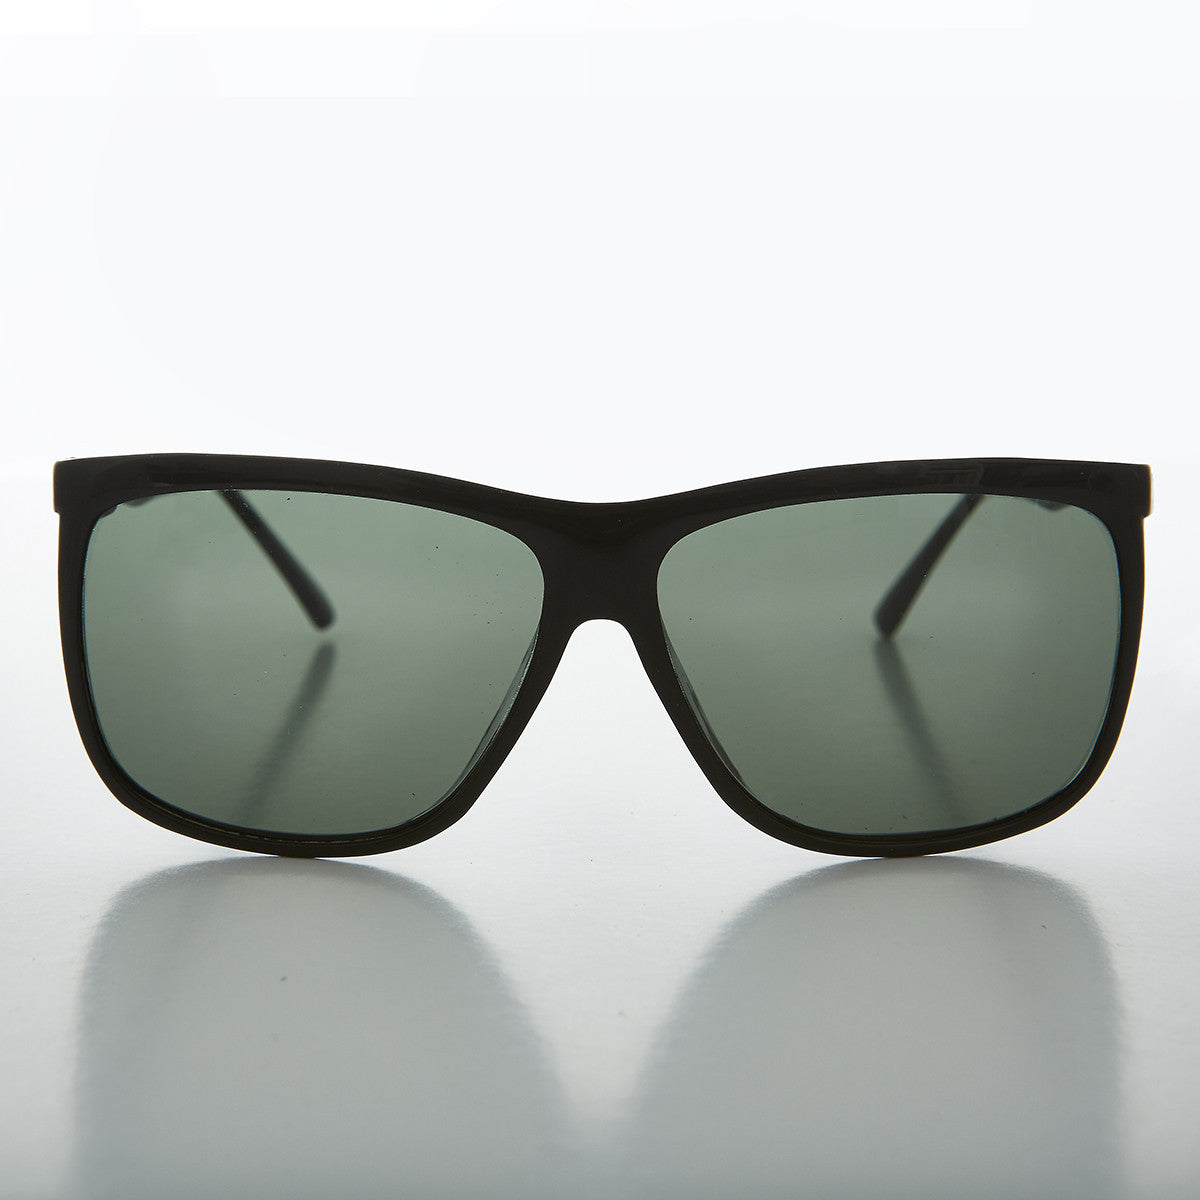 oversized square classic vintage sunglass with glass lens